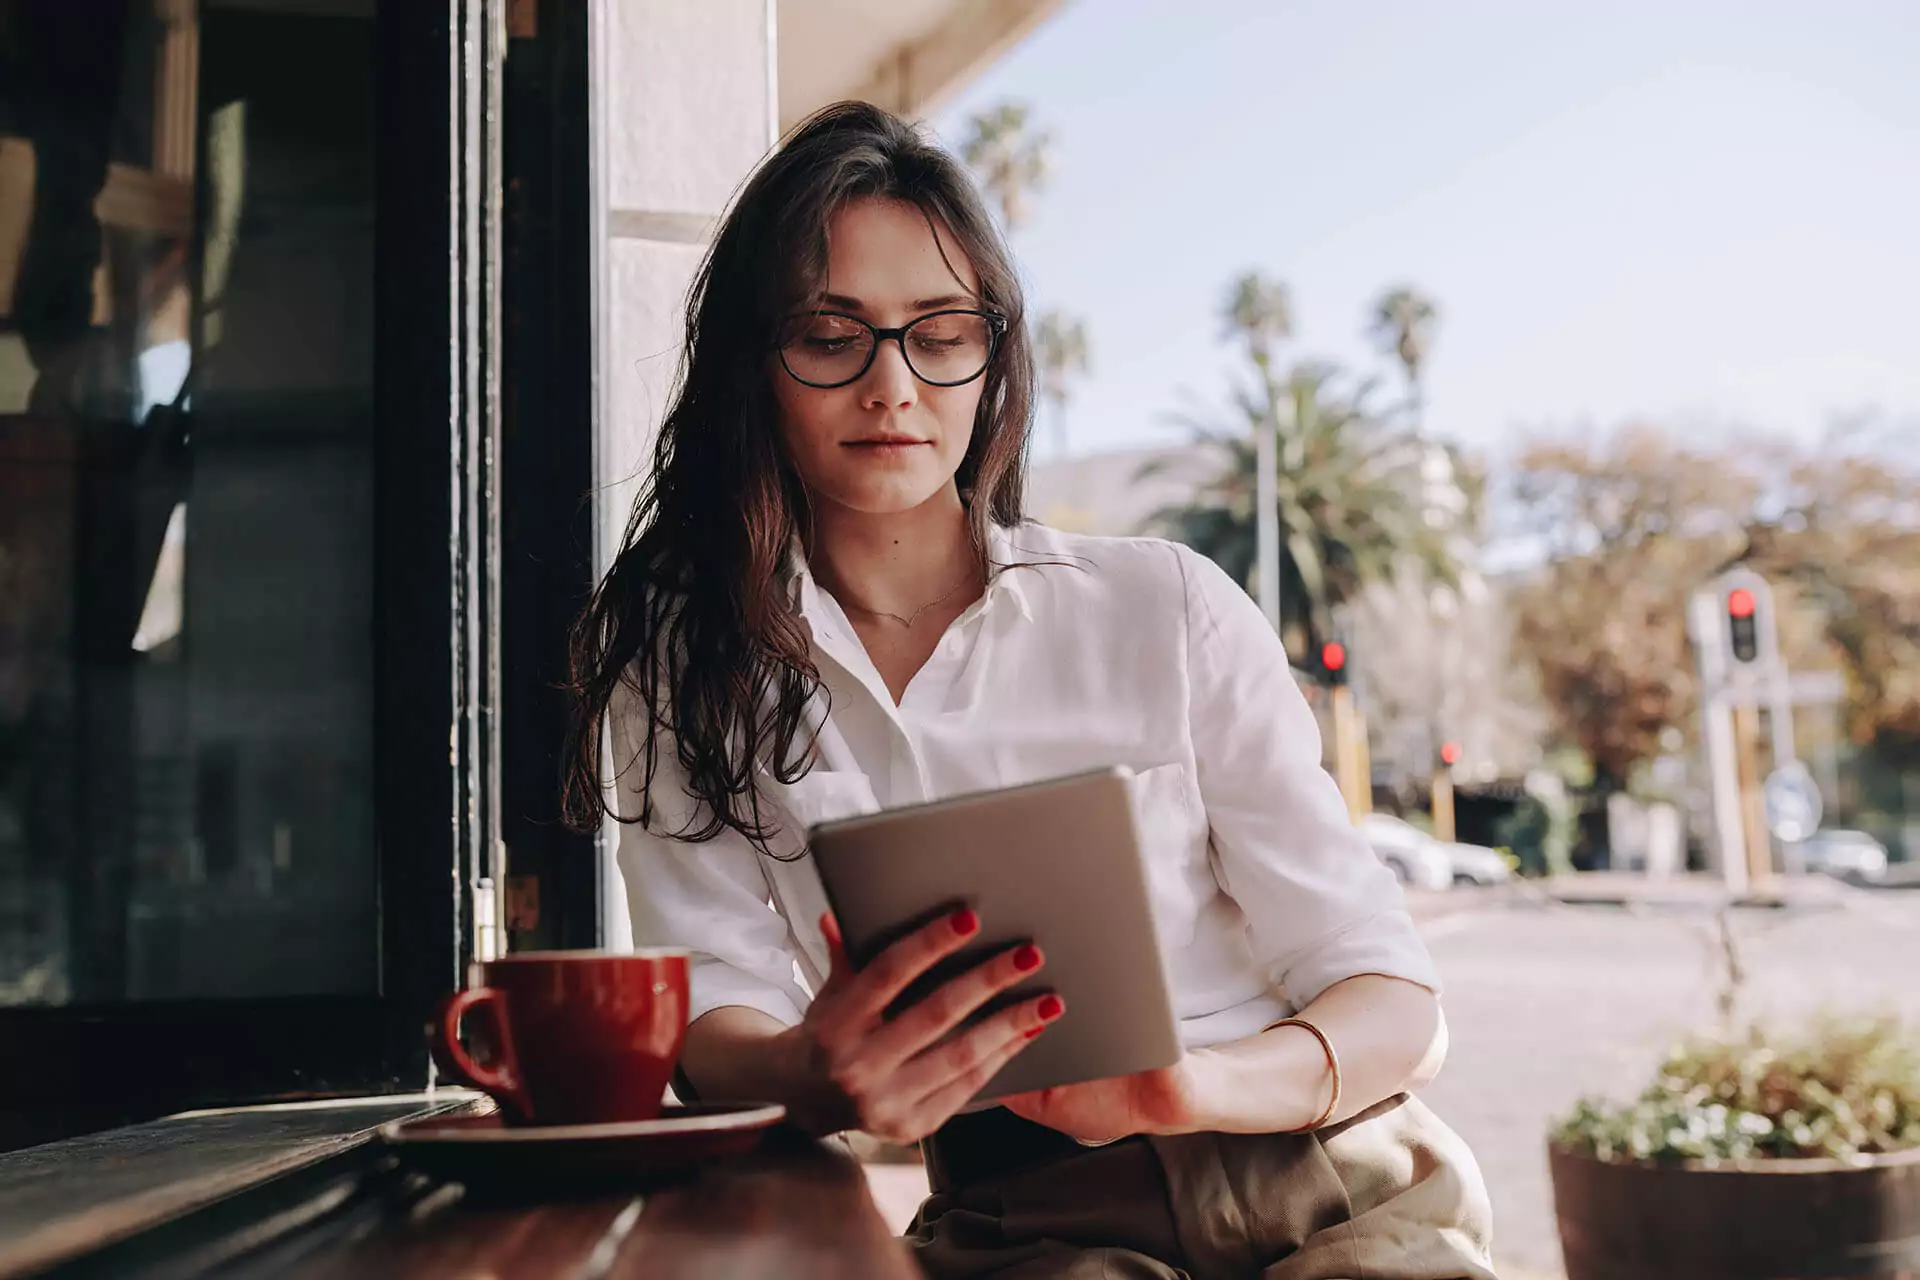 Woman holding tablet sitting at an outdoor cafe table with coffee cup on it